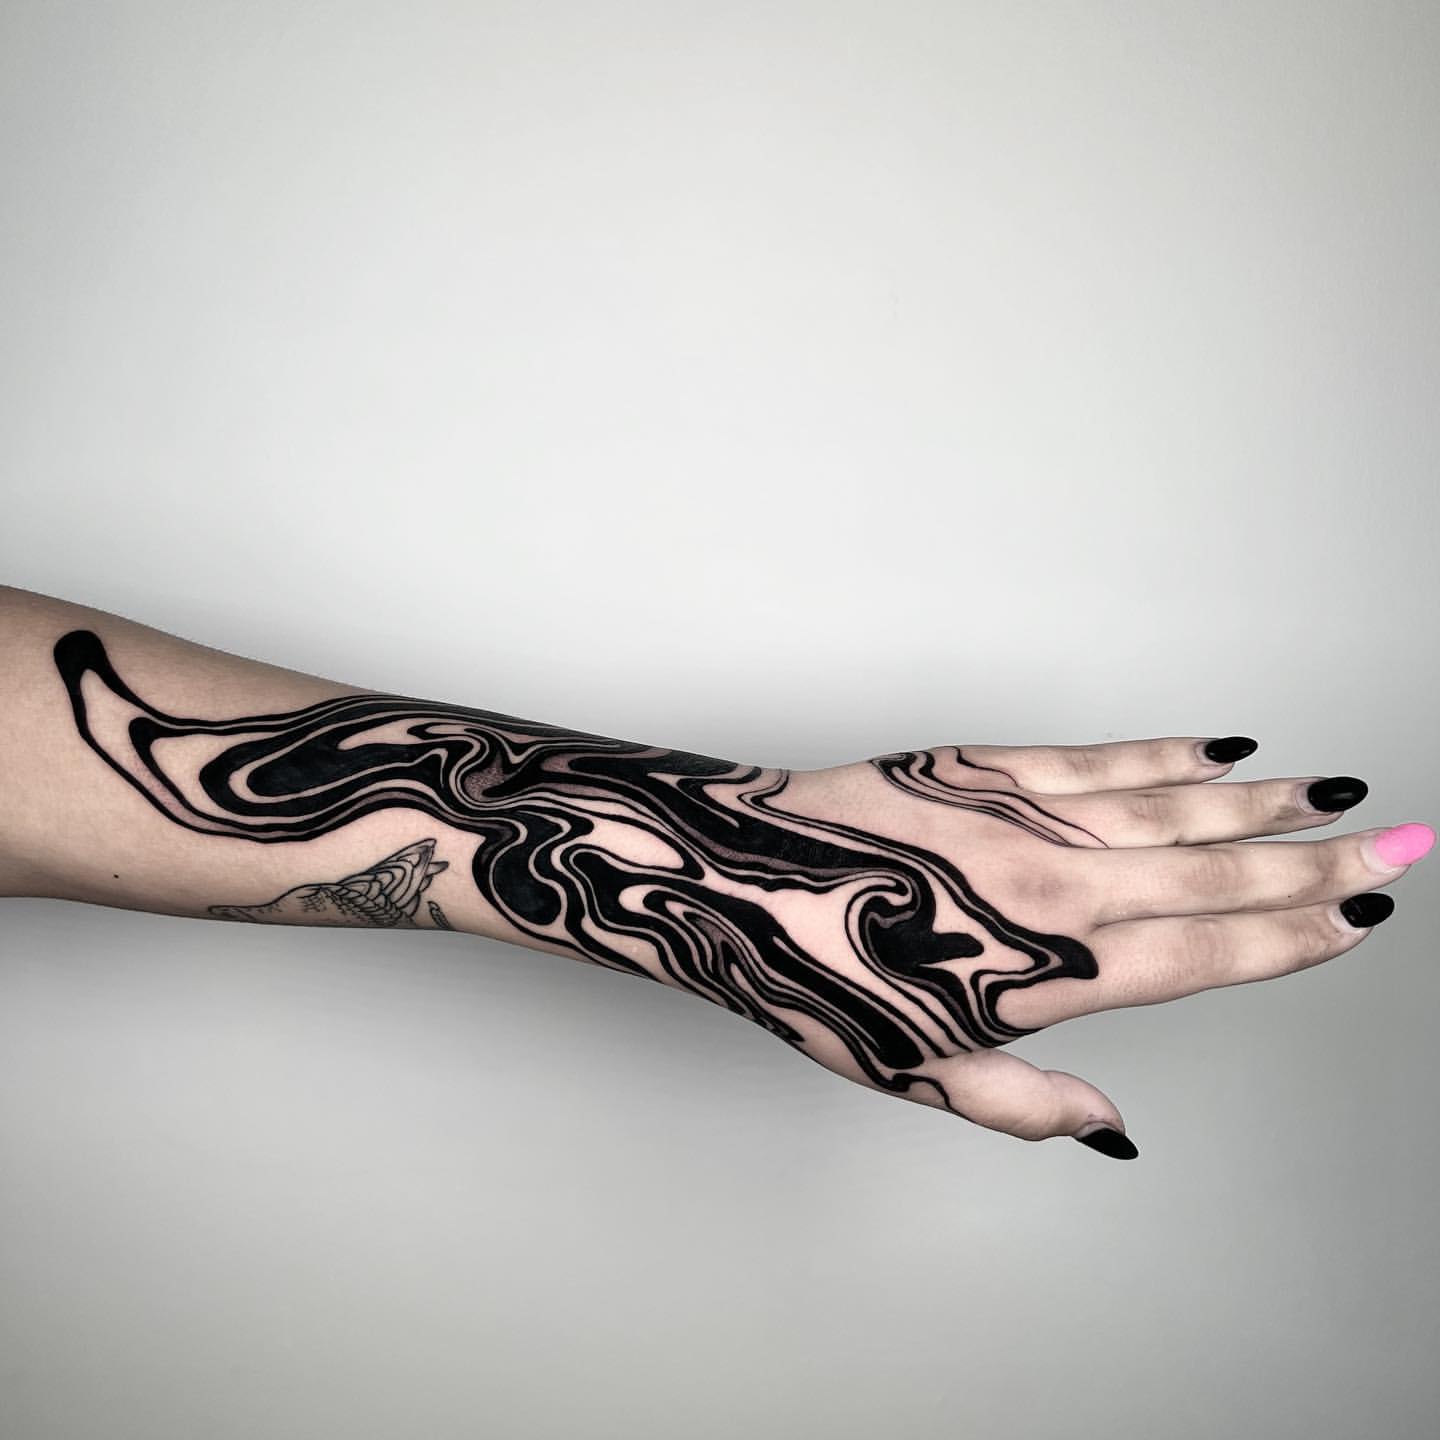 Amazing Abstract tattoo by p e s t e